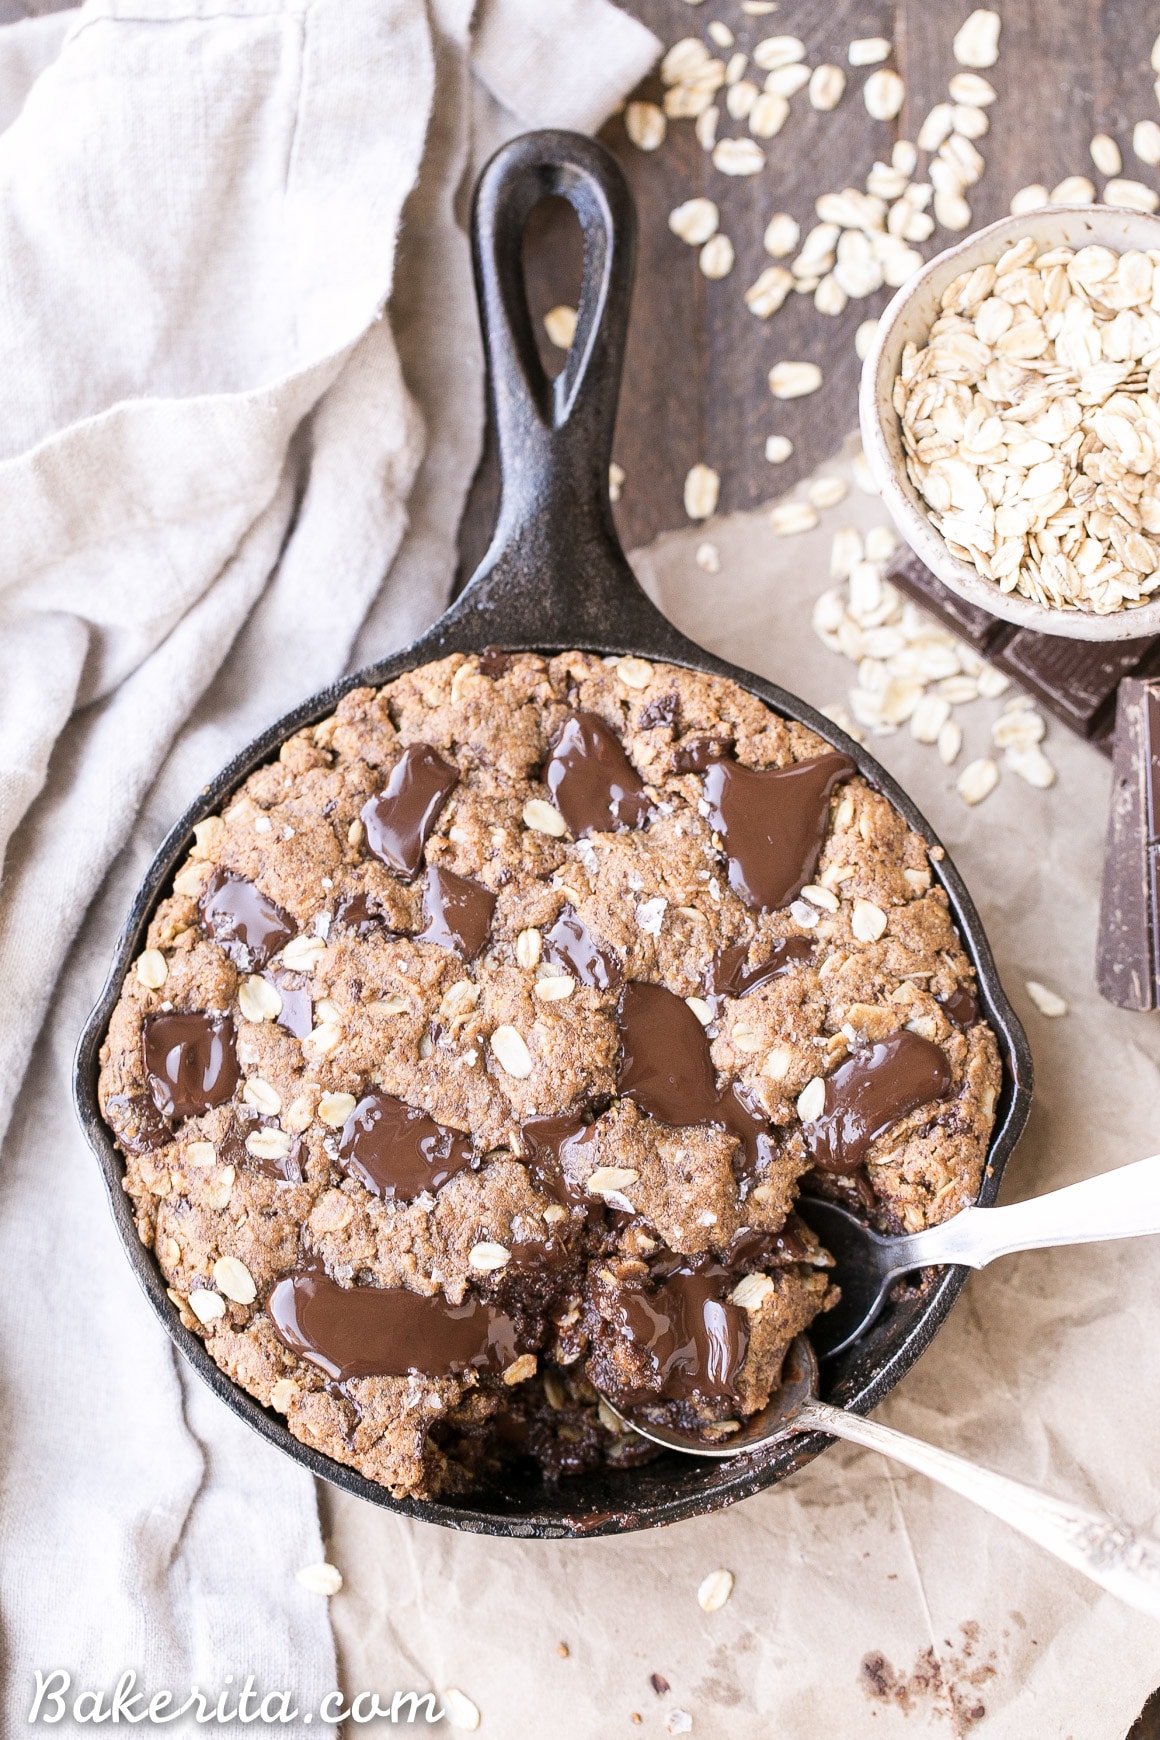 This Oatmeal Chocolate Chip Skillet Cookie is the ultimate thick, gooey oatmeal cookie! This gluten-free and vegan dessert is loaded with gooey chocolate. This one is sure to satisfy your chocolate cravings!